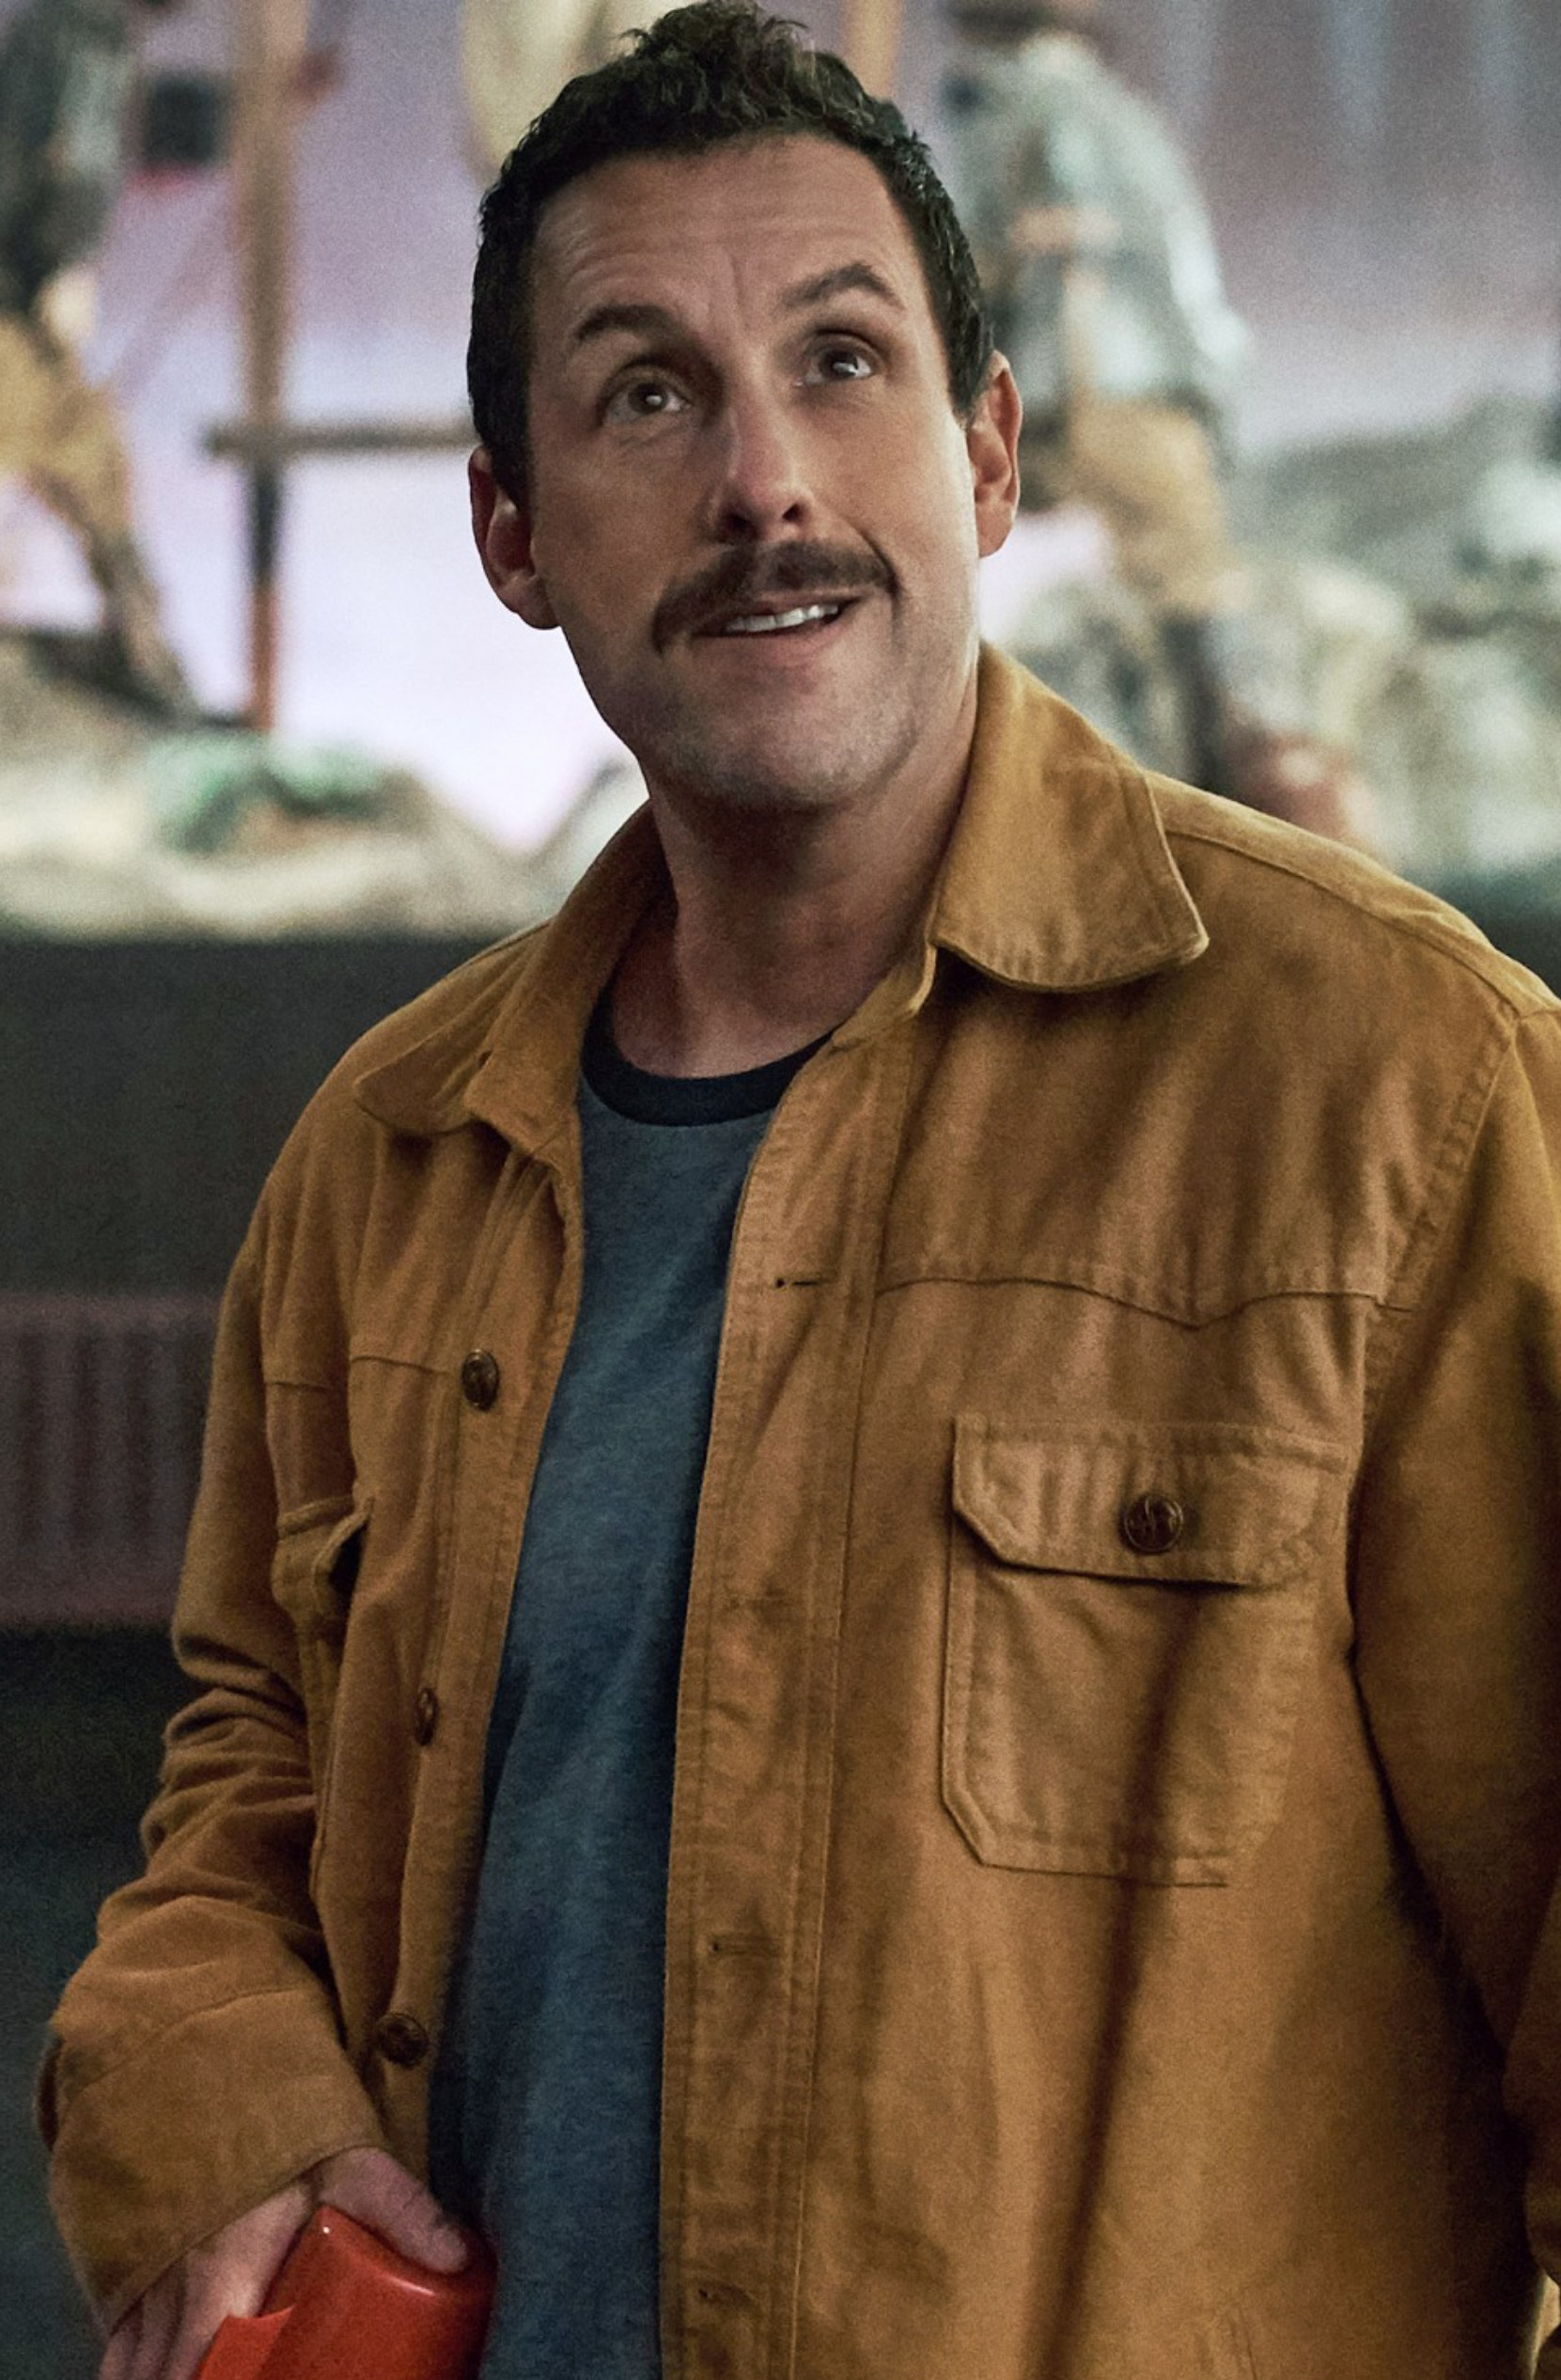 Sandler with a mustache, watching something mysterious on Halloween night